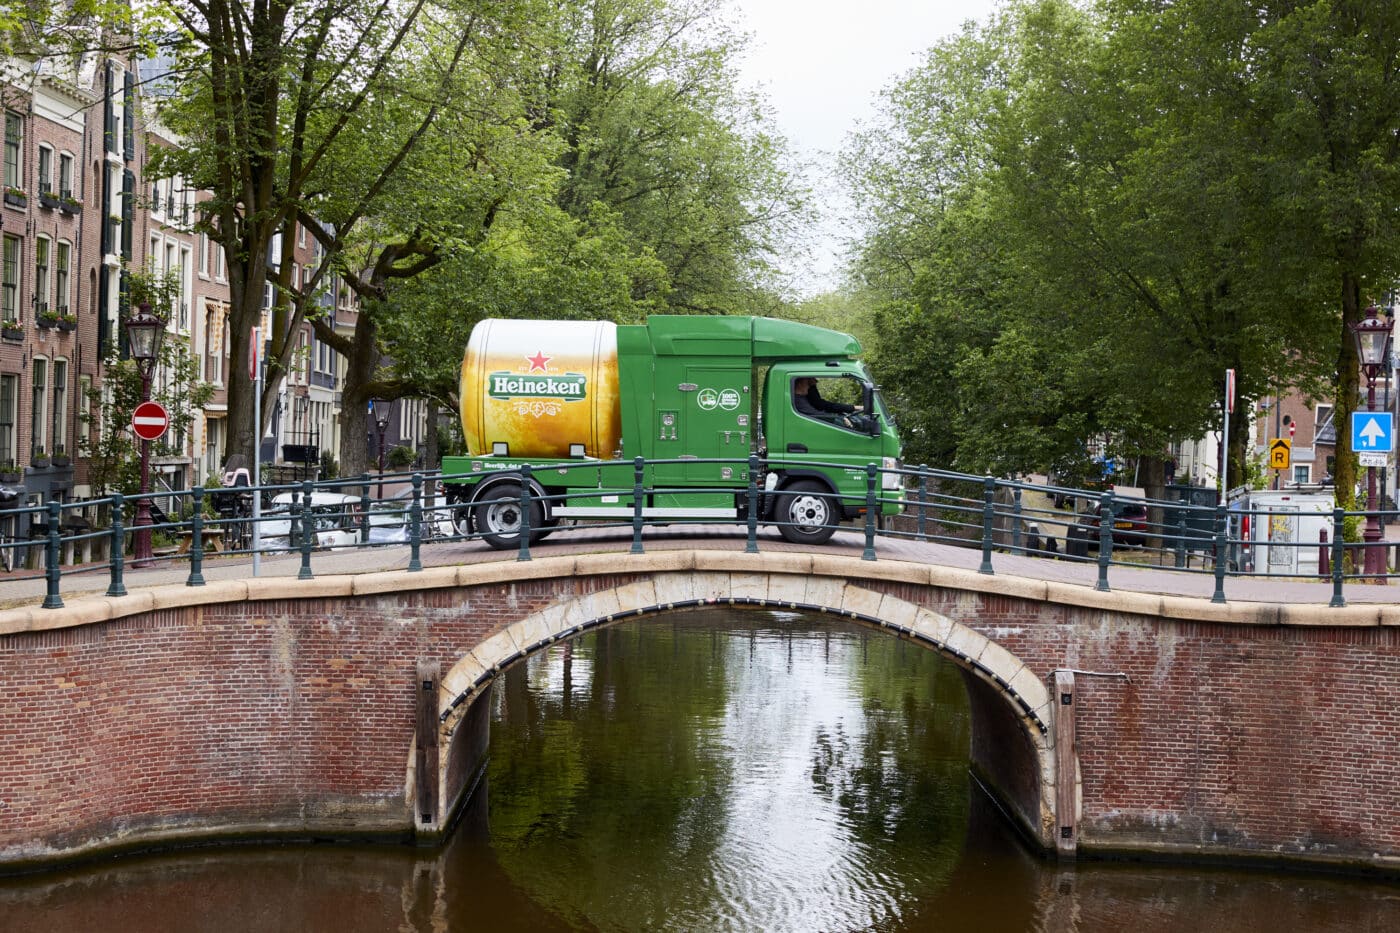 A fully electric fuso eCanter with a special tank wagon construction delivers Heineken beer in amsterdam emission-free and low noise.